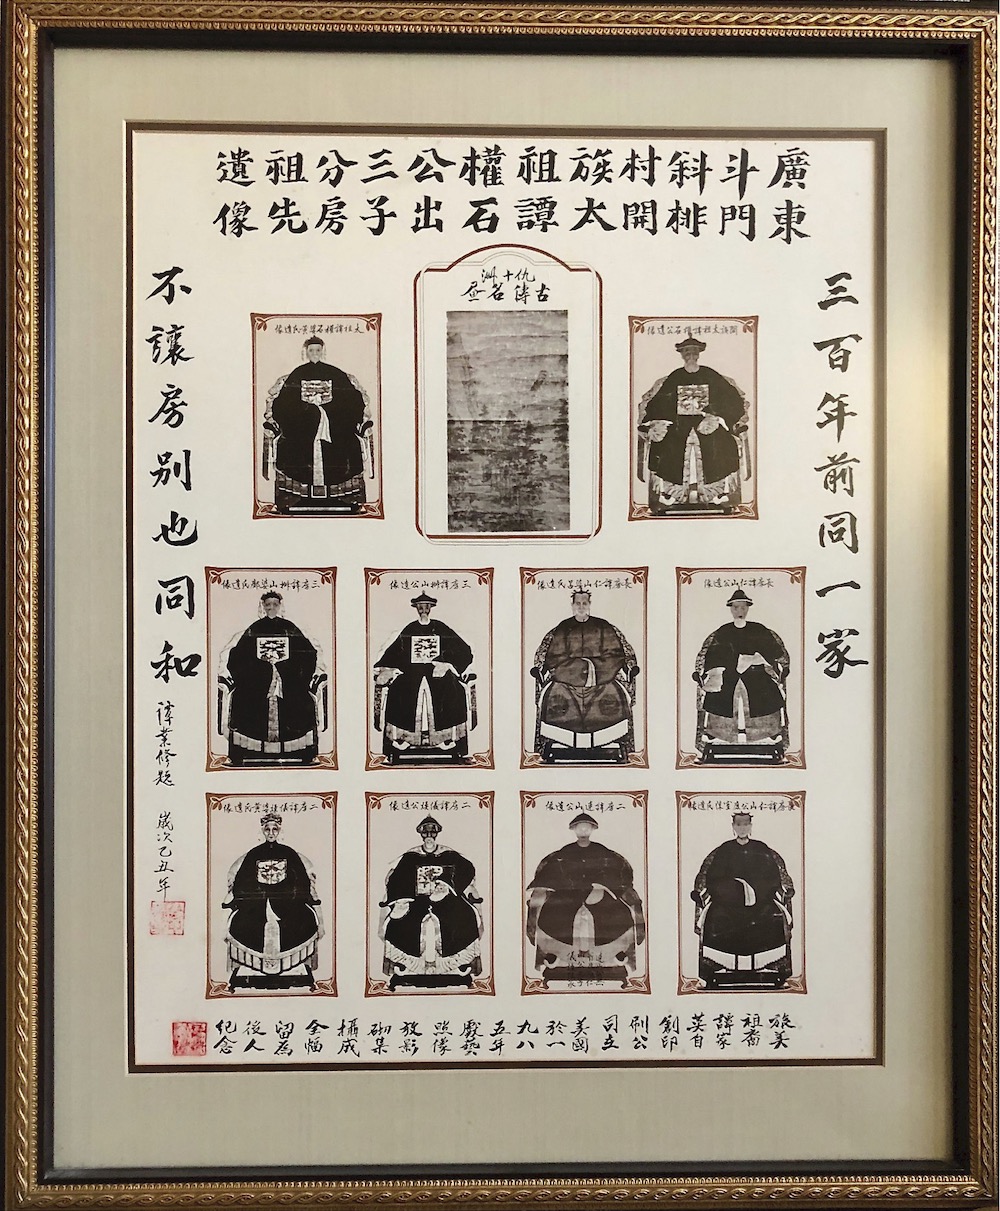 Portrait of 300-year-old ancestors framed with Chinese calligraphy